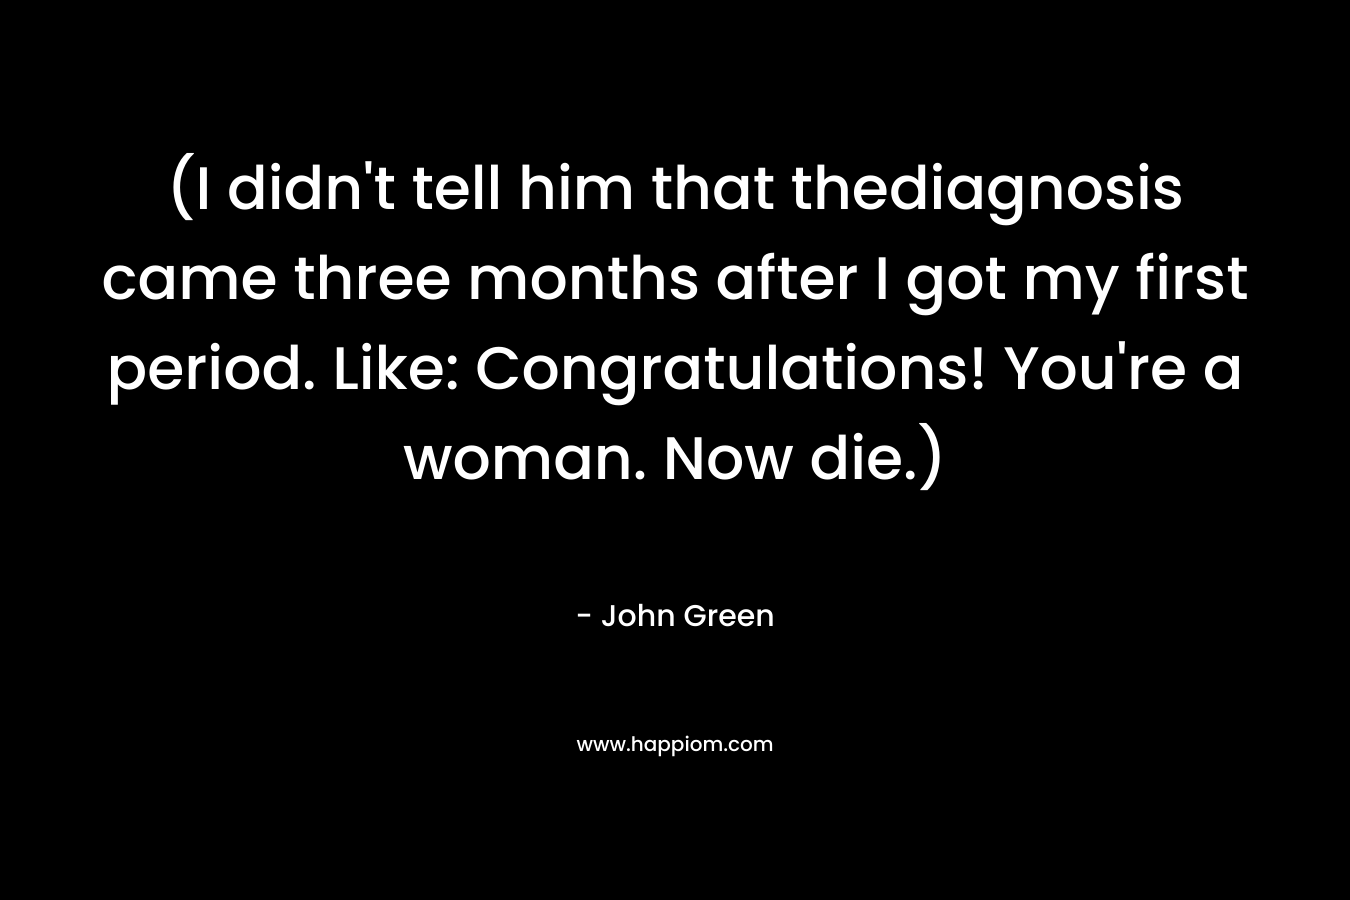 (I didn’t tell him that thediagnosis came three months after I got my first period. Like: Congratulations! You’re a woman. Now die.) – John Green